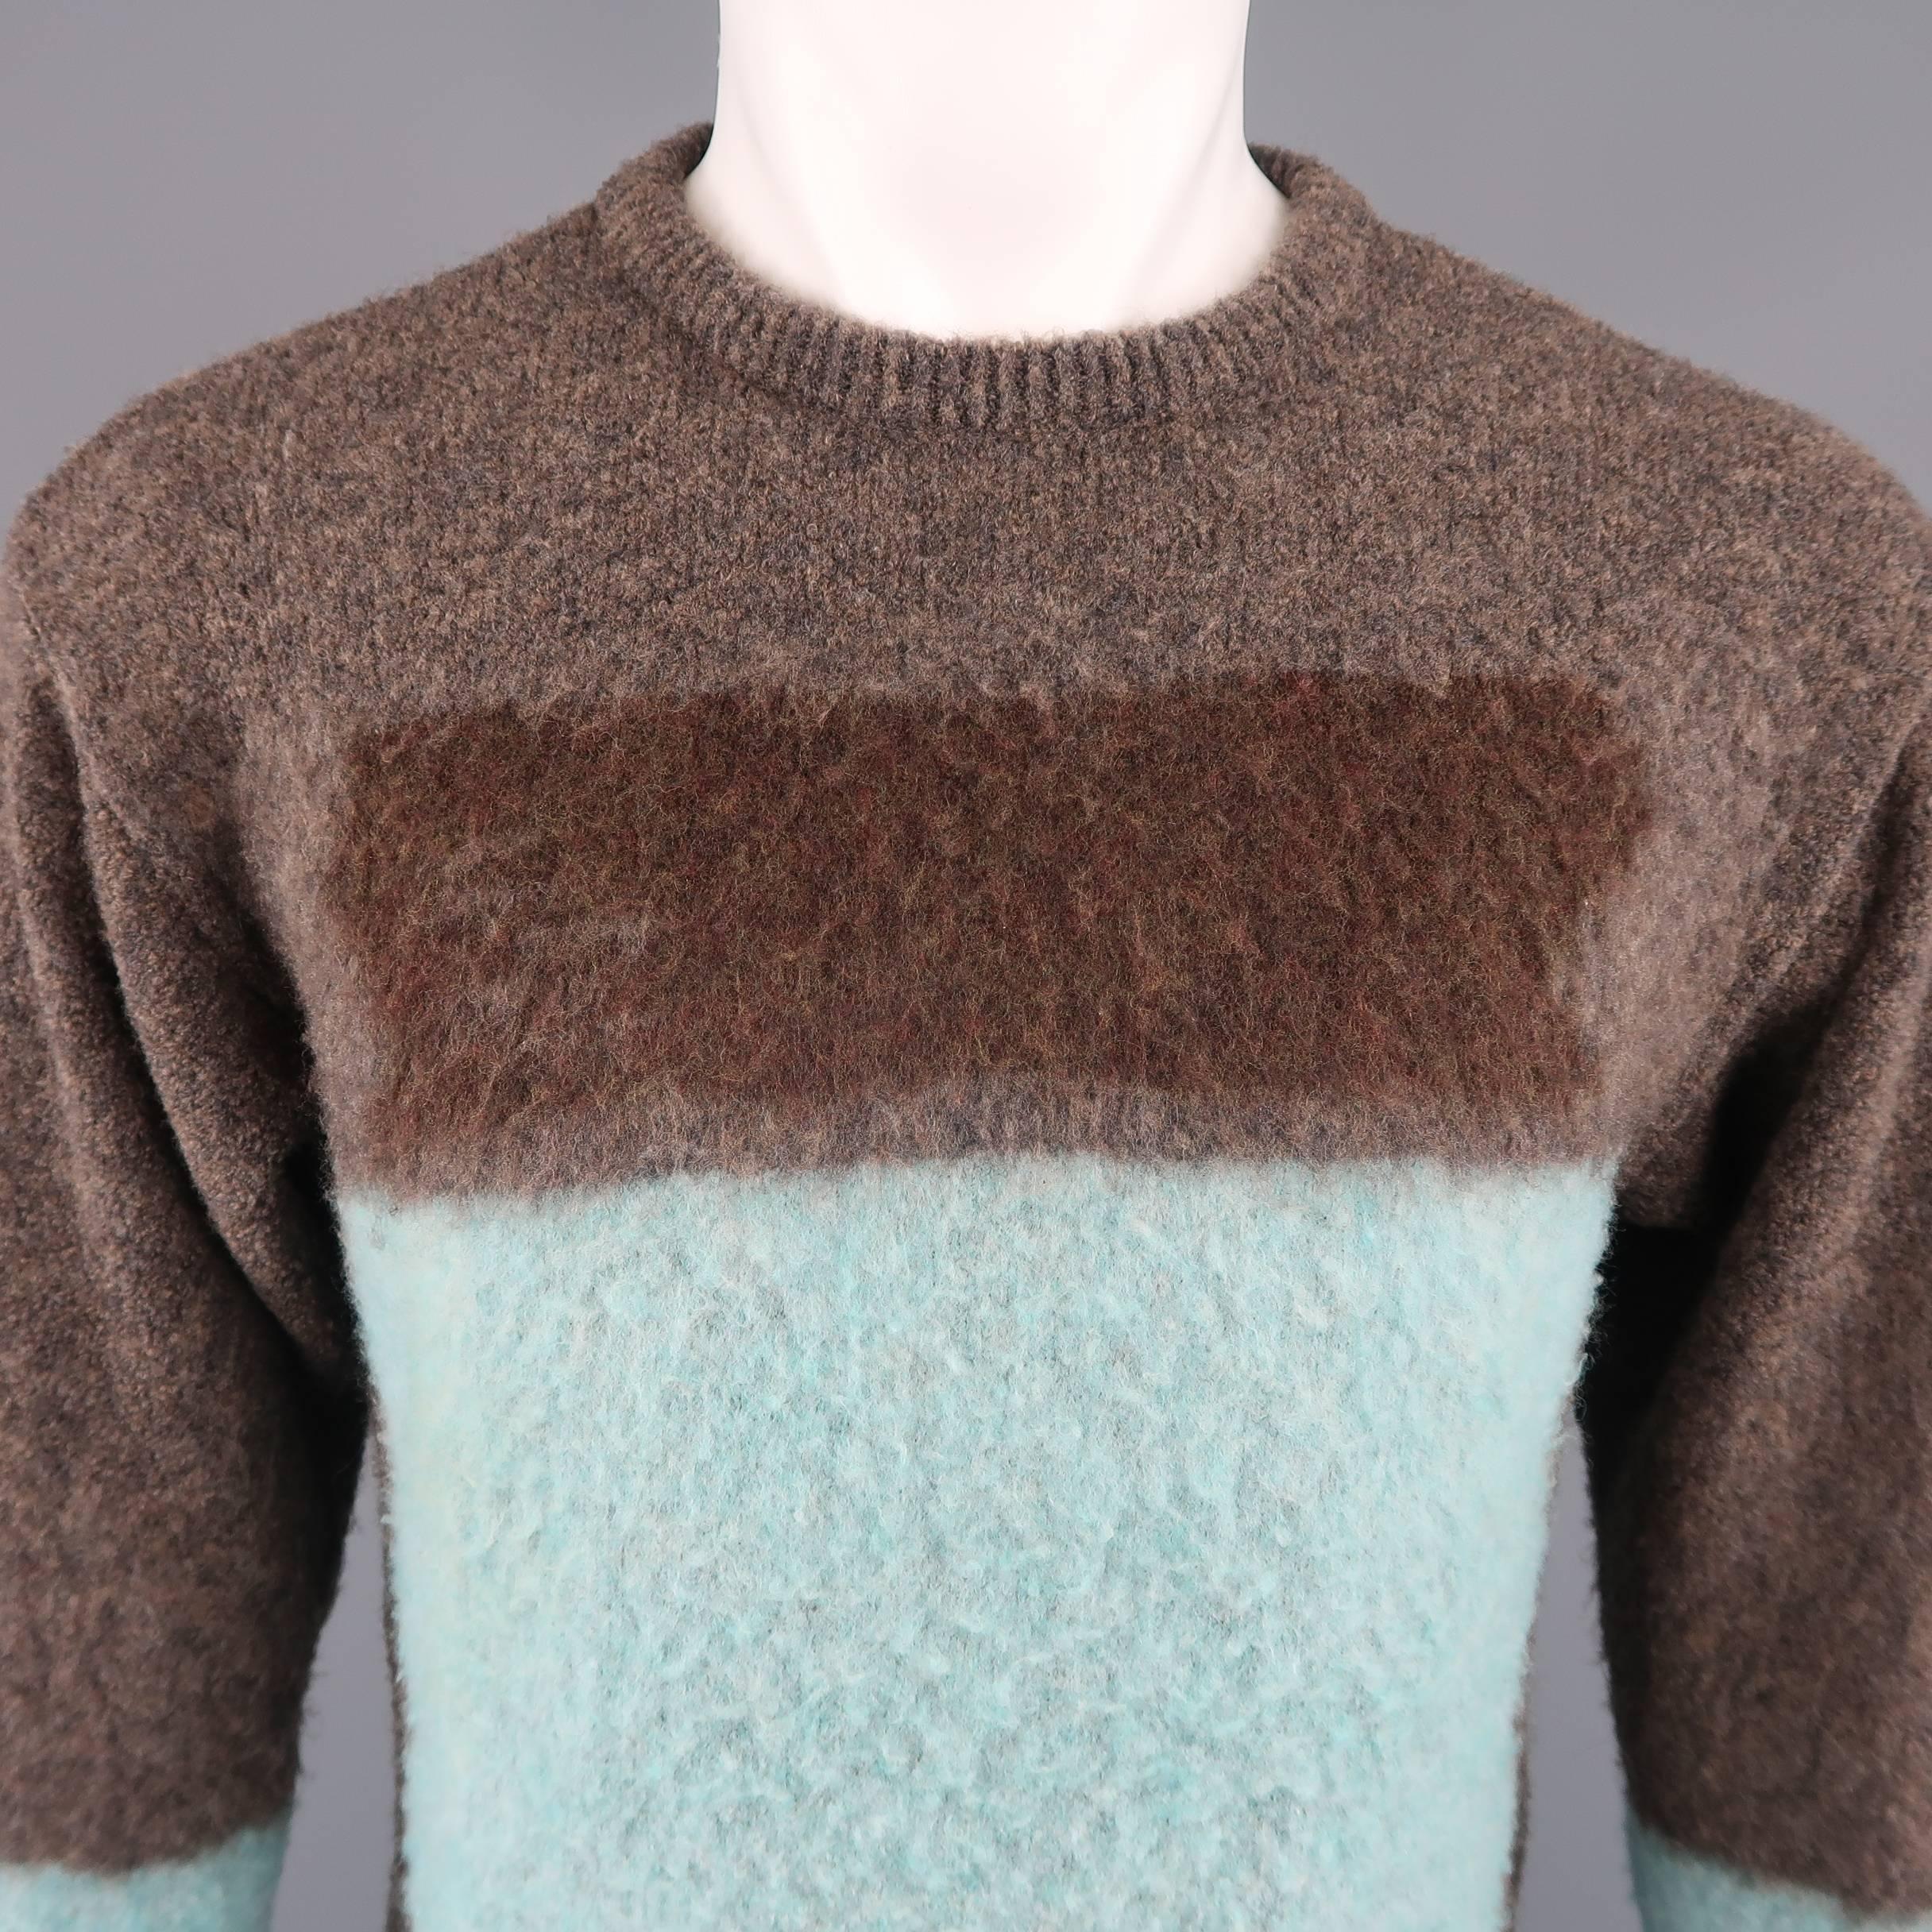 Vintage 1990's Gianni Versace pullover sweater comes in heathered taupe textured wool blend knit with a crew neck and black and aqua blue color block pattern. Made in Italy.
 
Good Pre-Owned Condition.
Marked: IT 48
 
Measurements:
 
Shoulder: 19